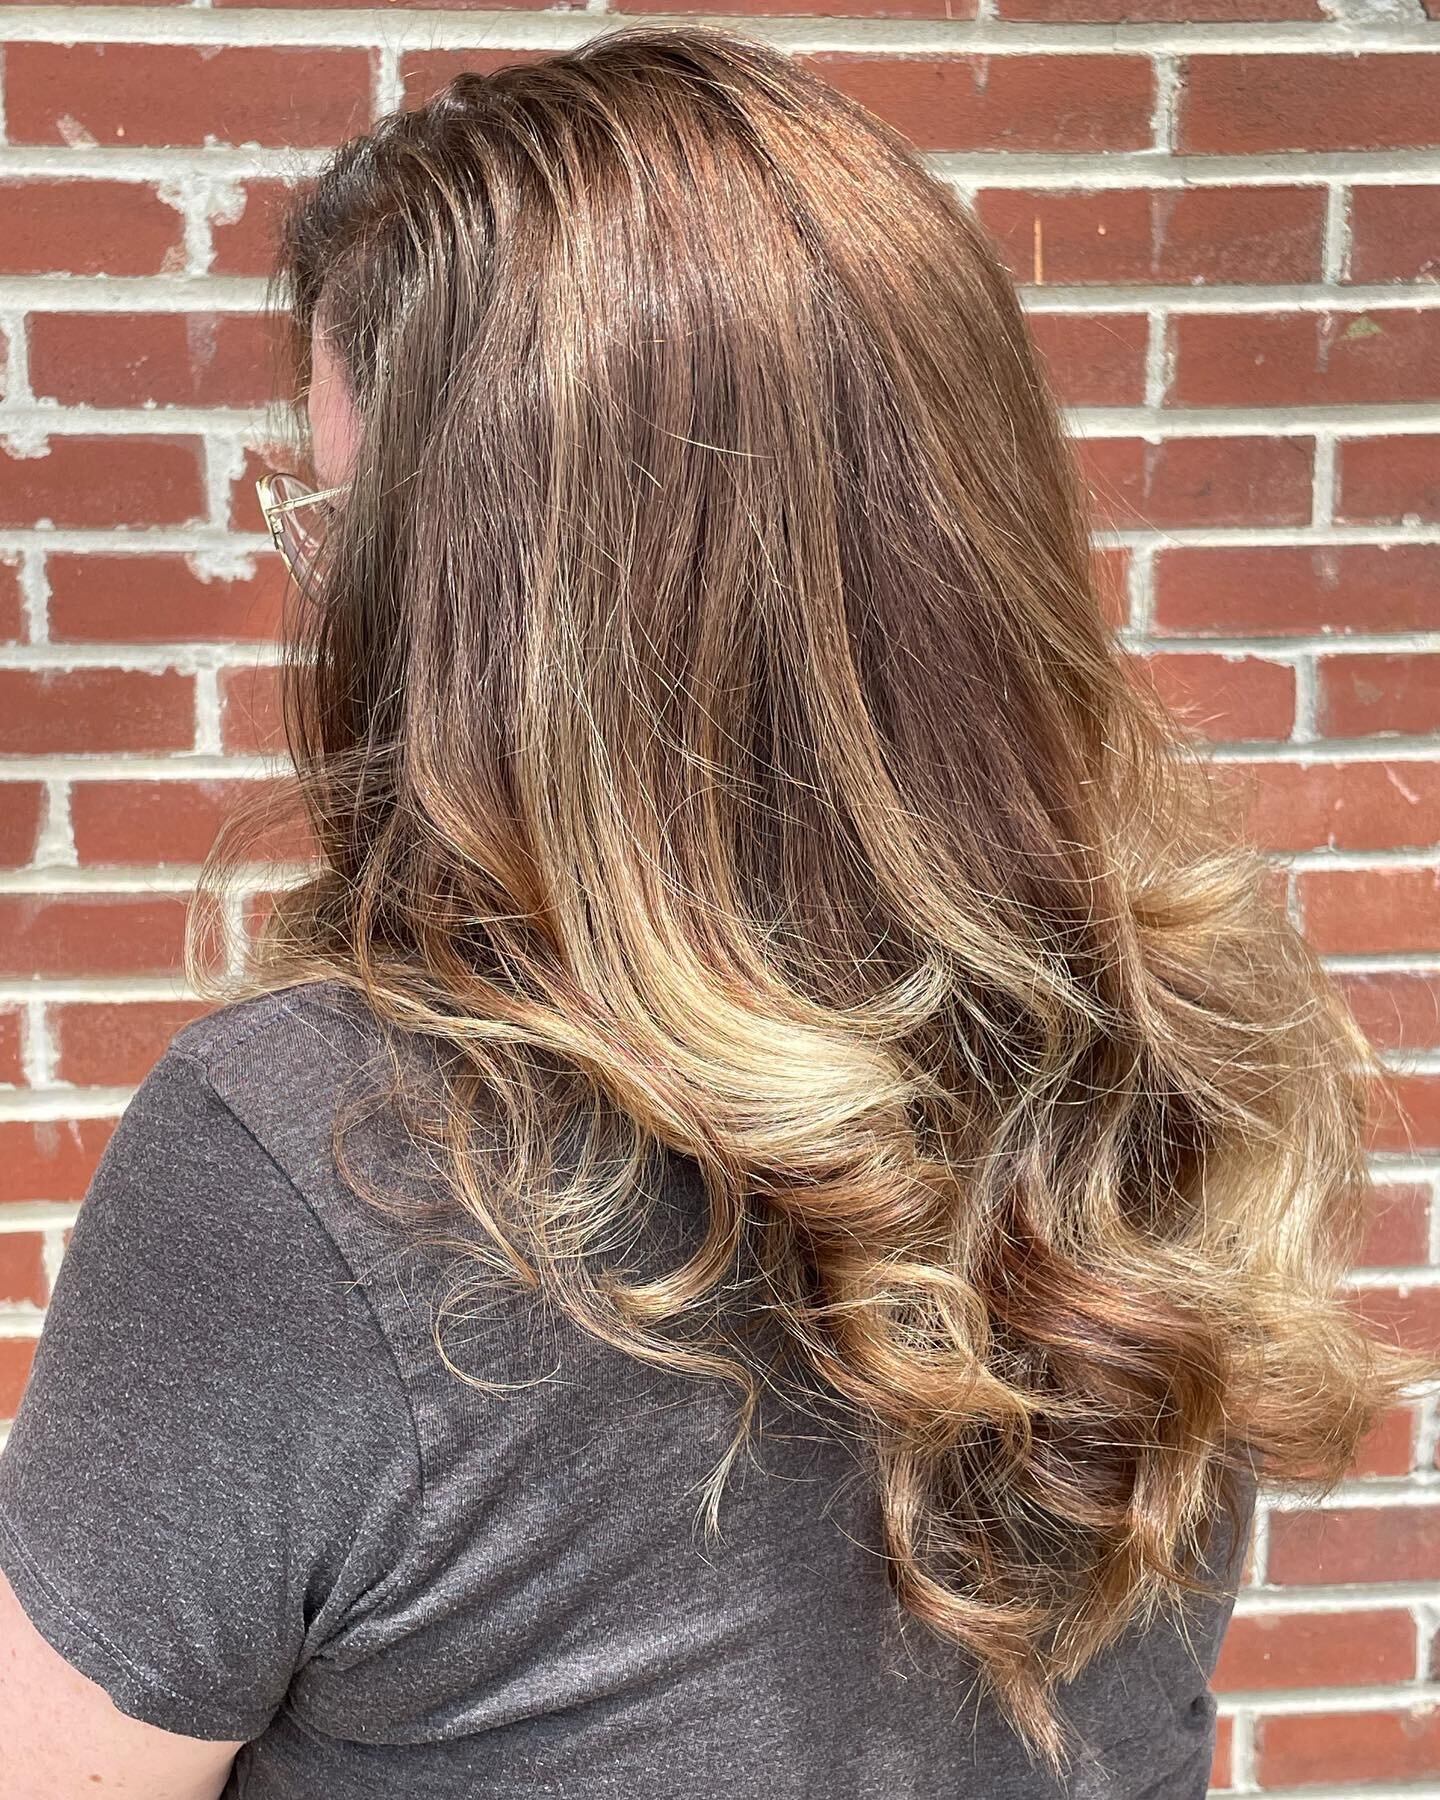 We're on a hair journey with this one. When a brunette wants to be ashy blonde, you can get them there fast, or you can get them there healthy. We chose healthy, but that doesn't mean she can't be fabulous on the way there 😍 Next stop, bright blonde